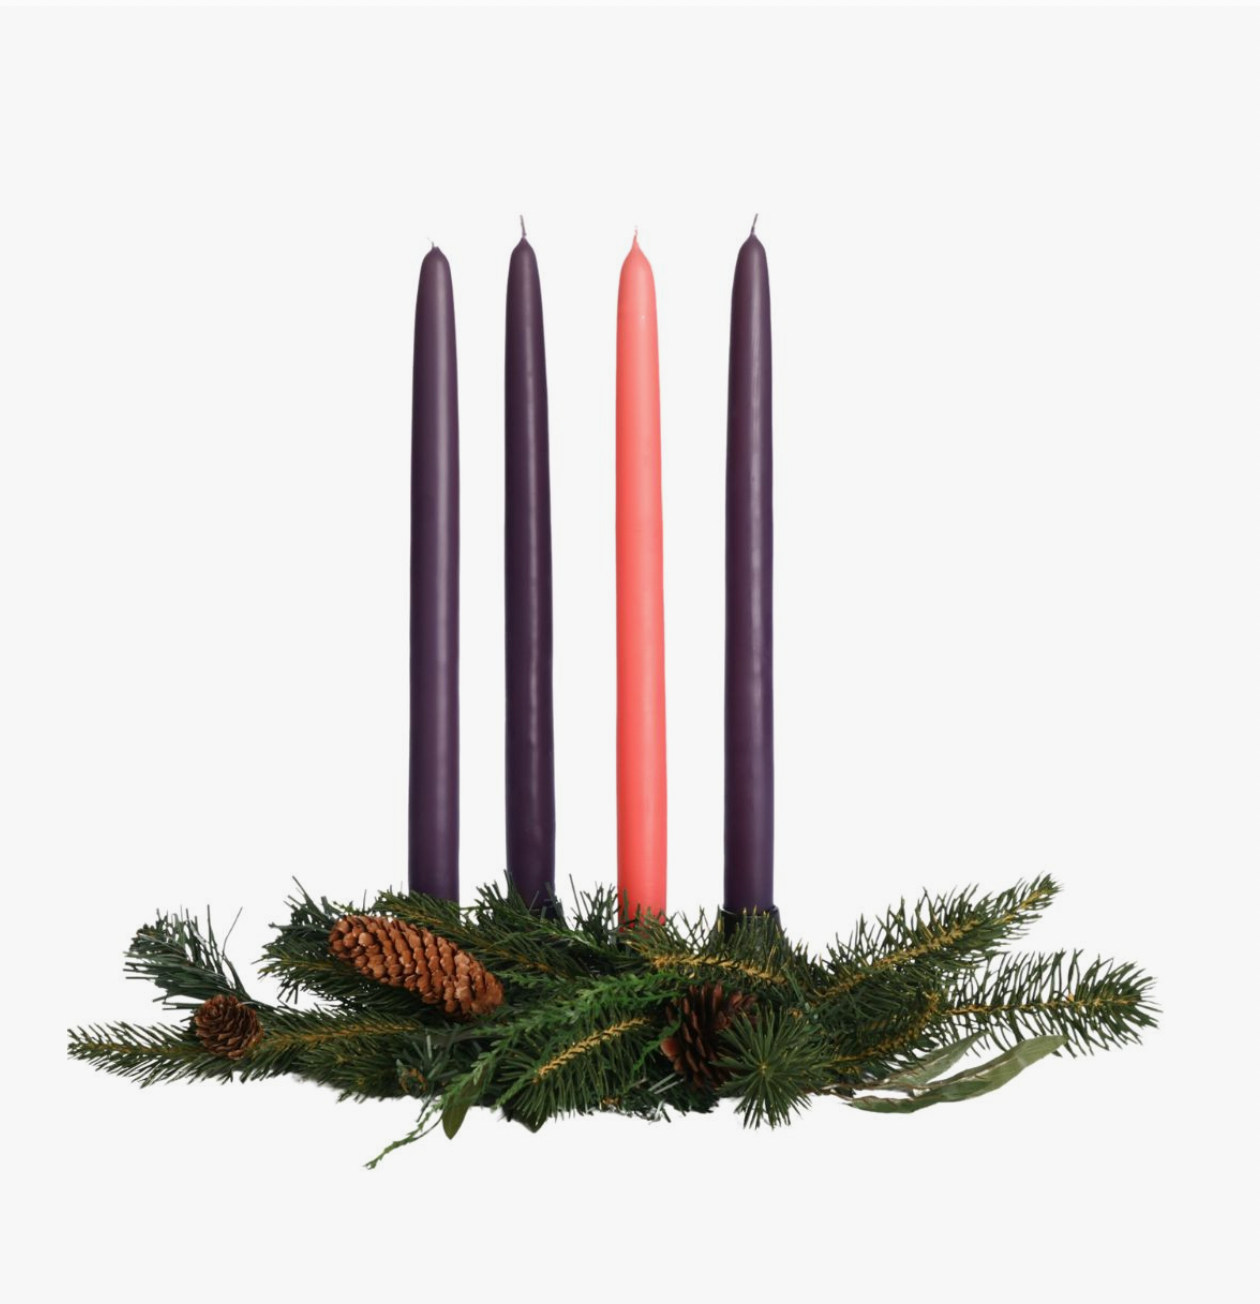 12" Advent Beeswax Tapers